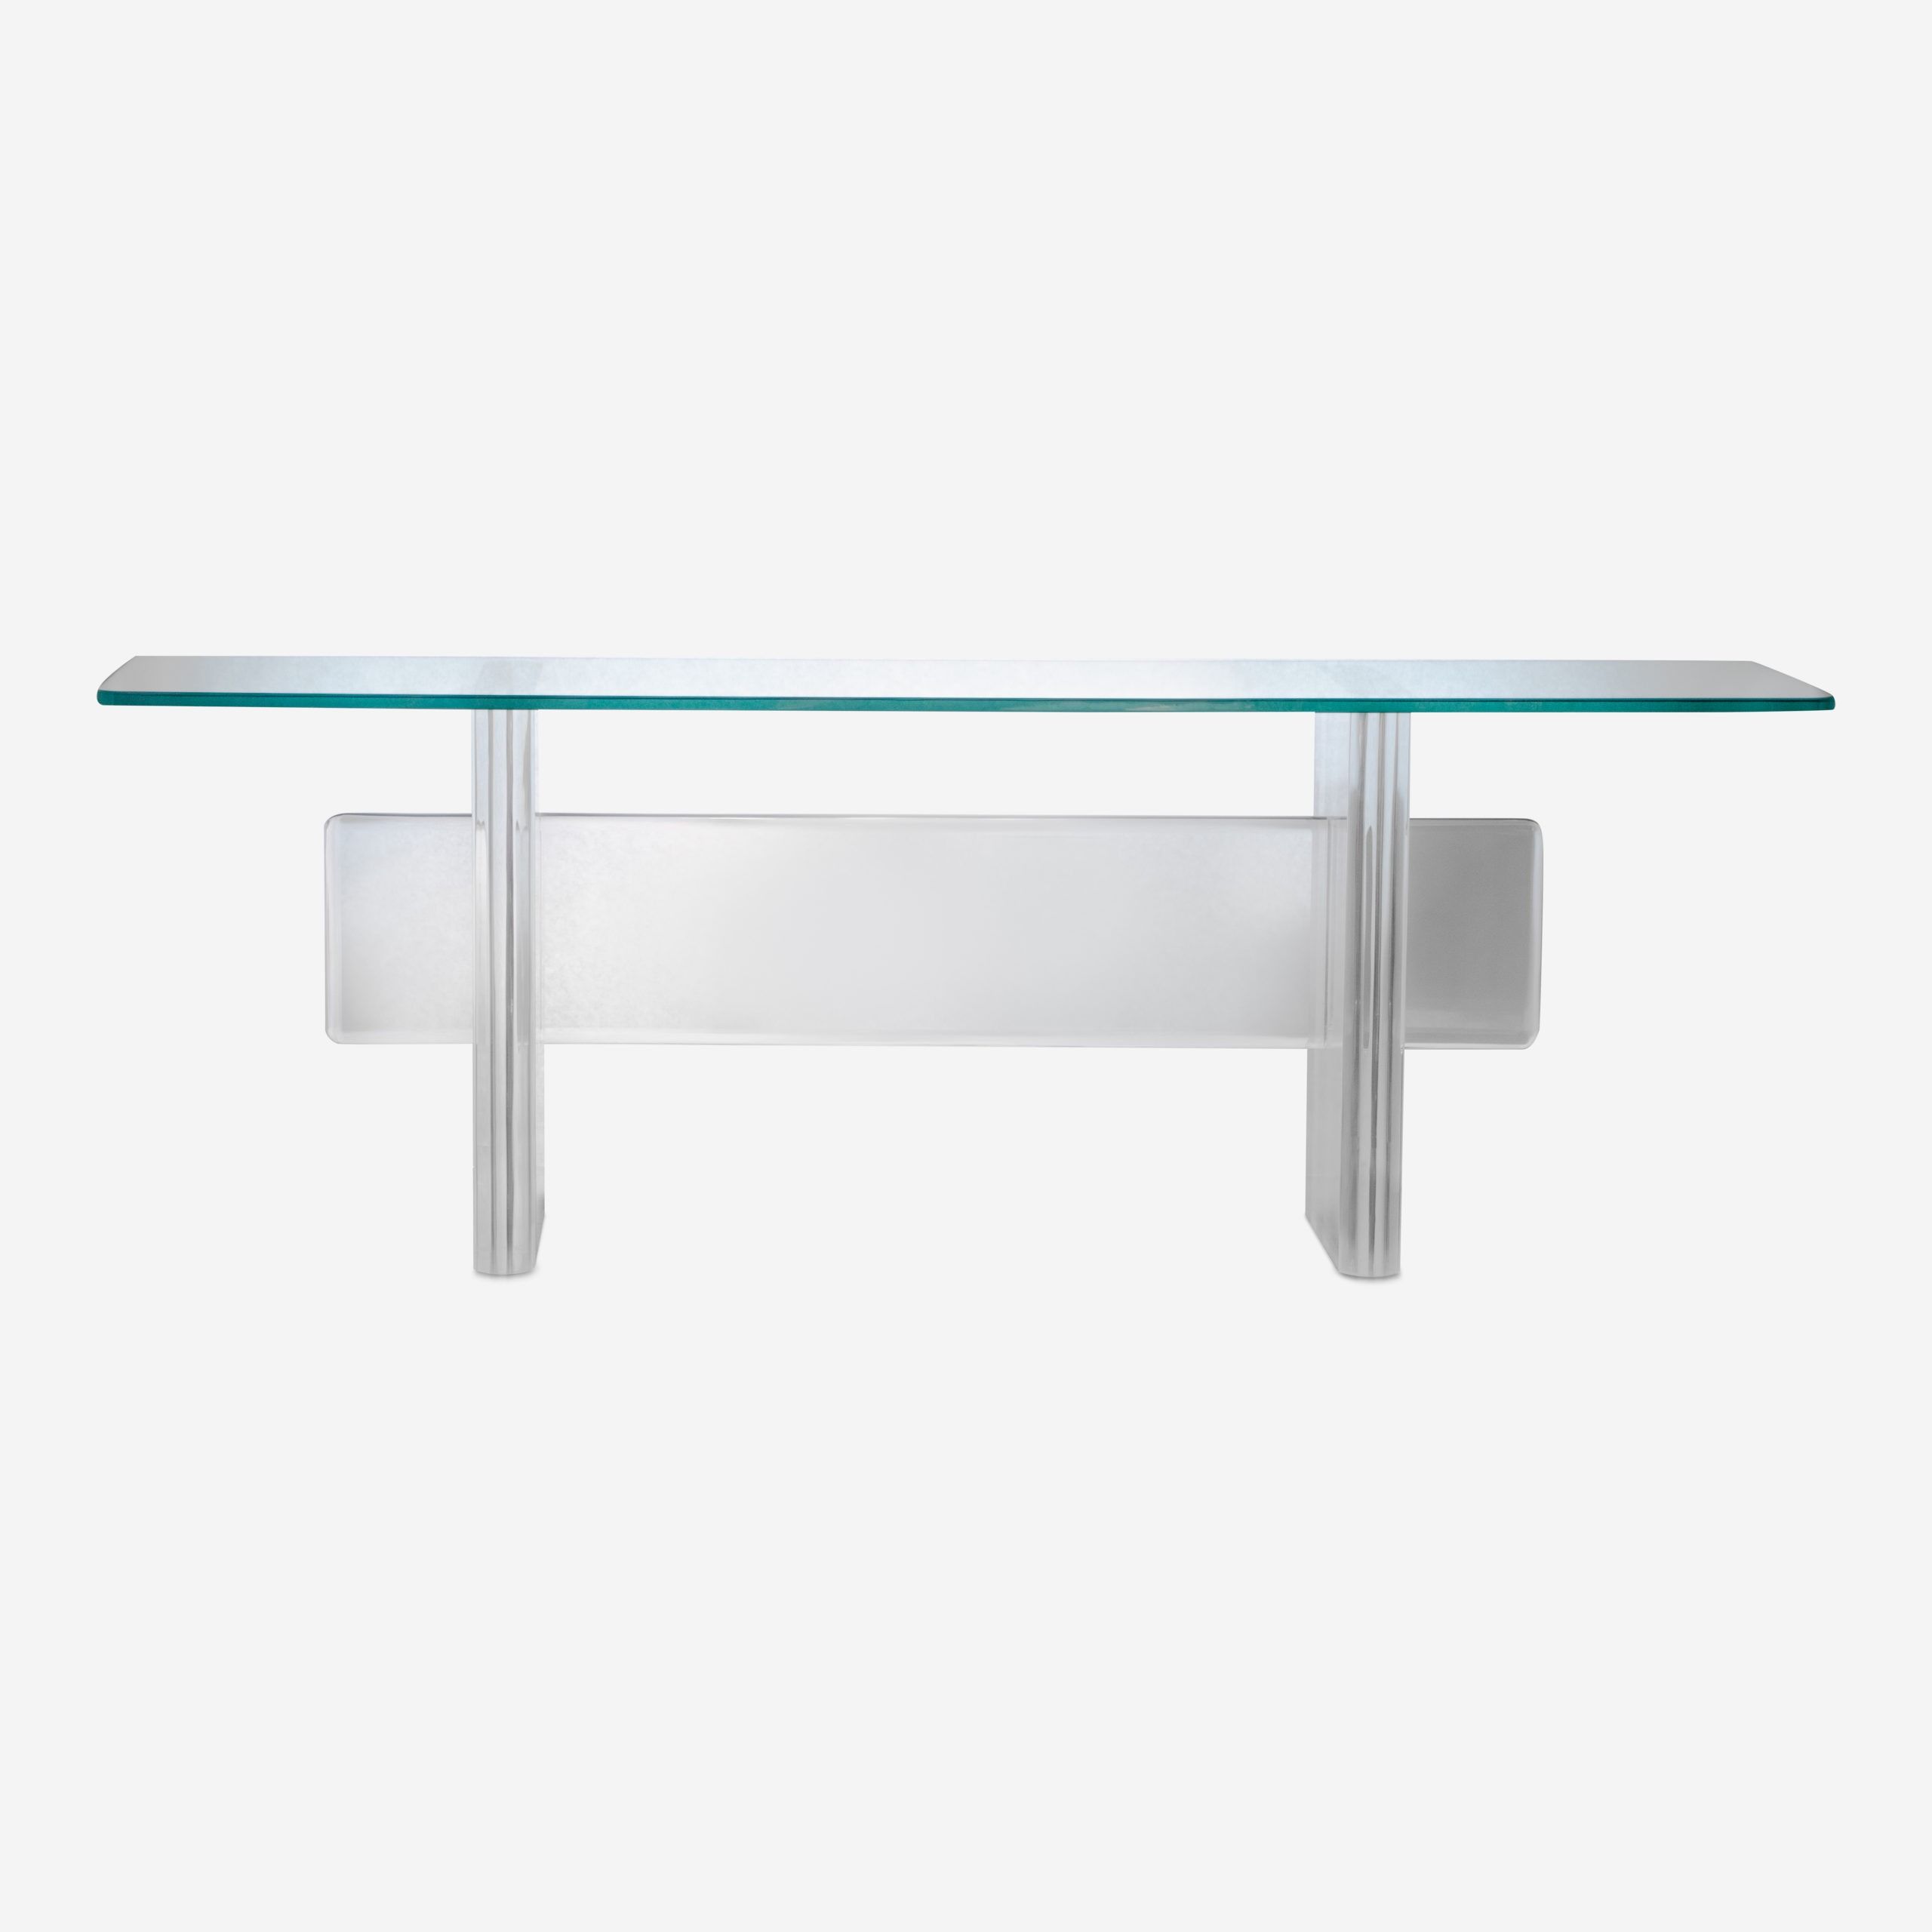 Large Lucite Console Tablekarl Springer (sold) – The Intended For Acrylic Console Tables (View 12 of 20)